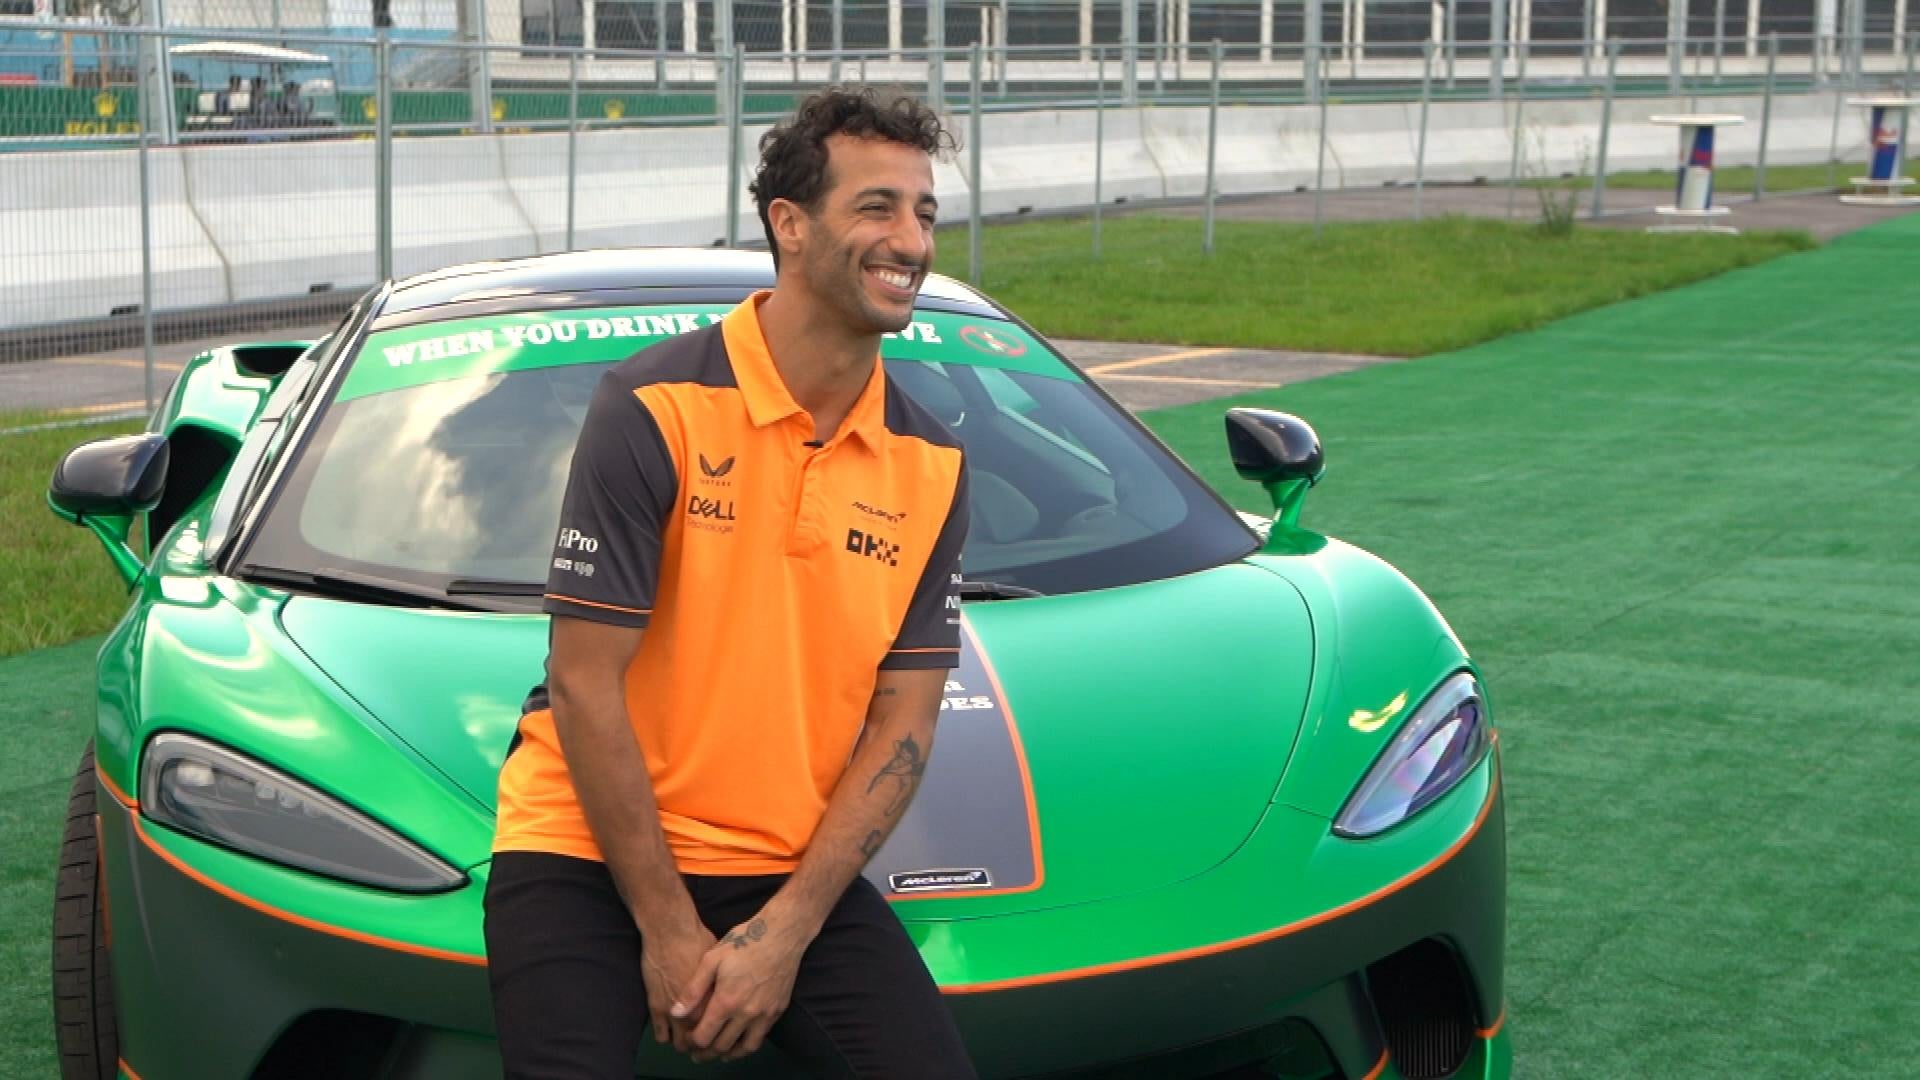 Daniel Ricciardo on How to Get Home Safely With Heineken's 'When You Drive, Never Drink' Campaign